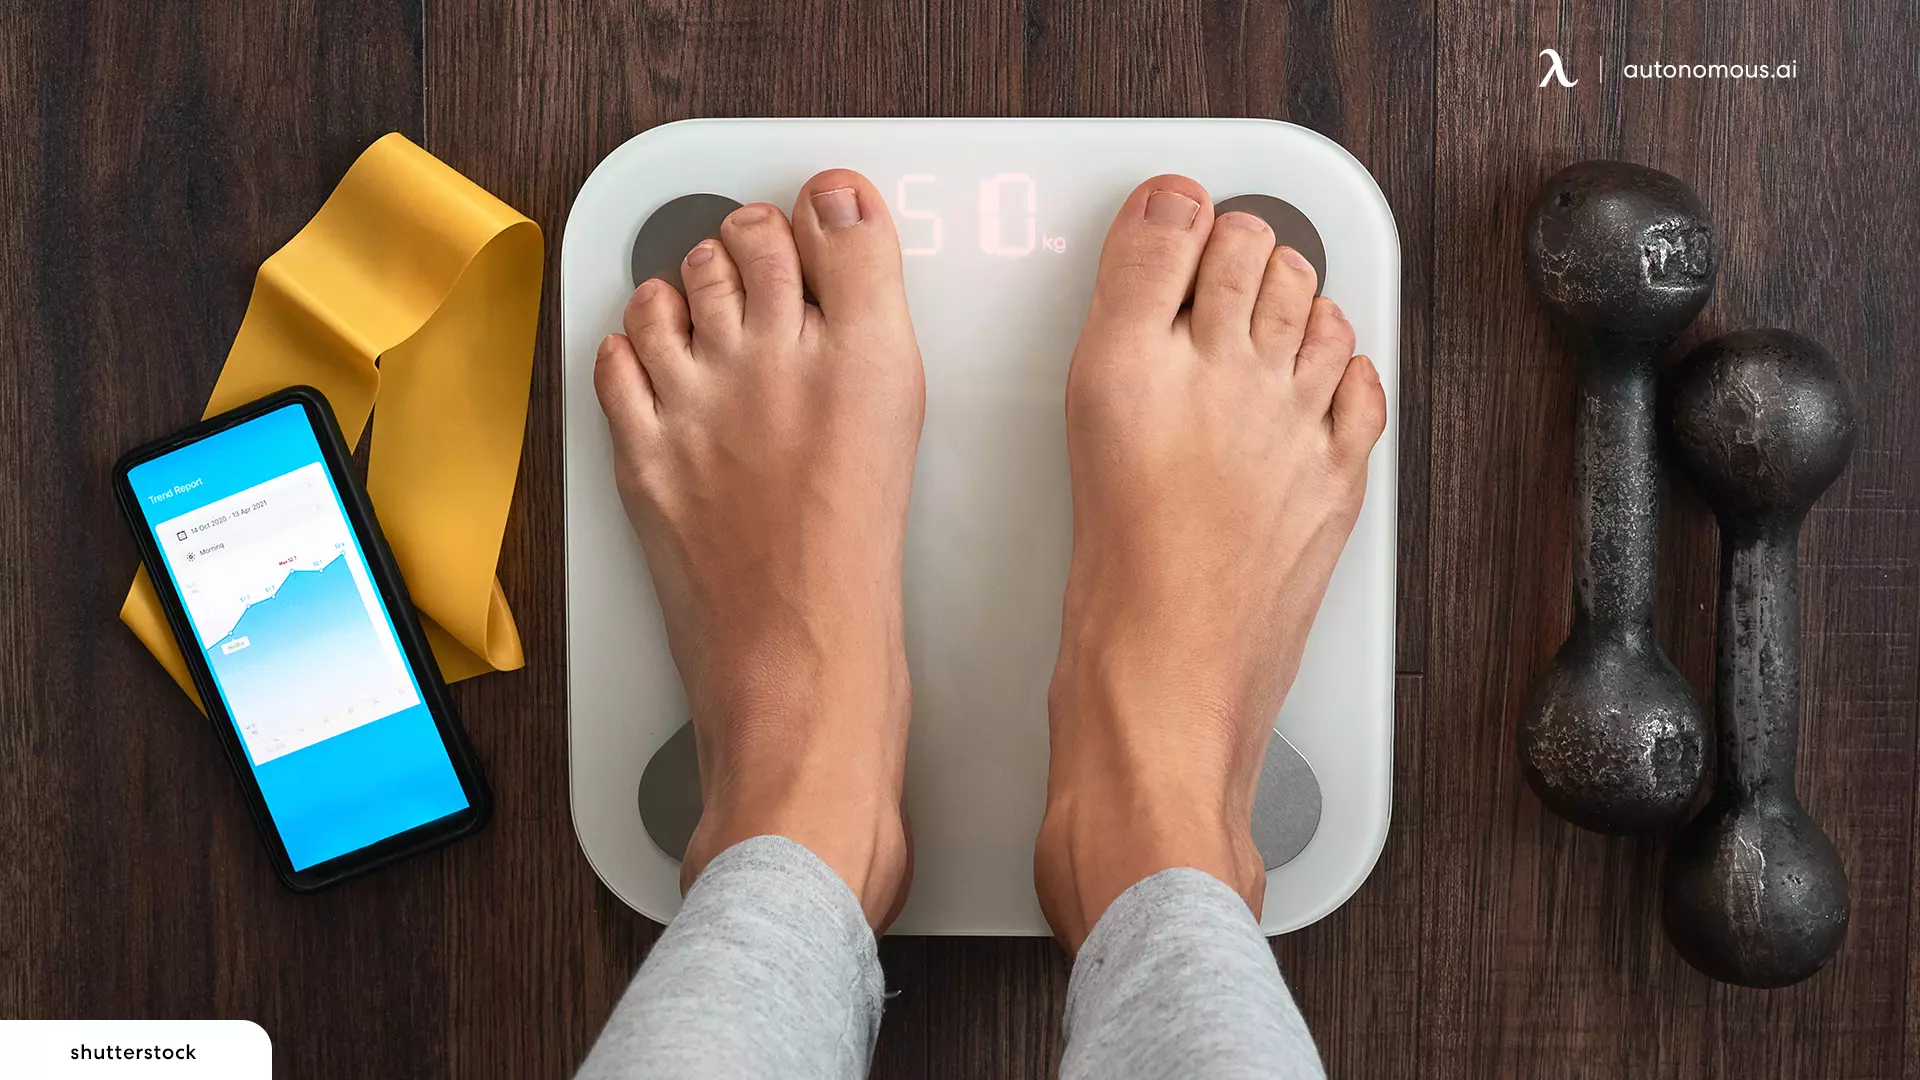 What to Look for in a Smart Scale?